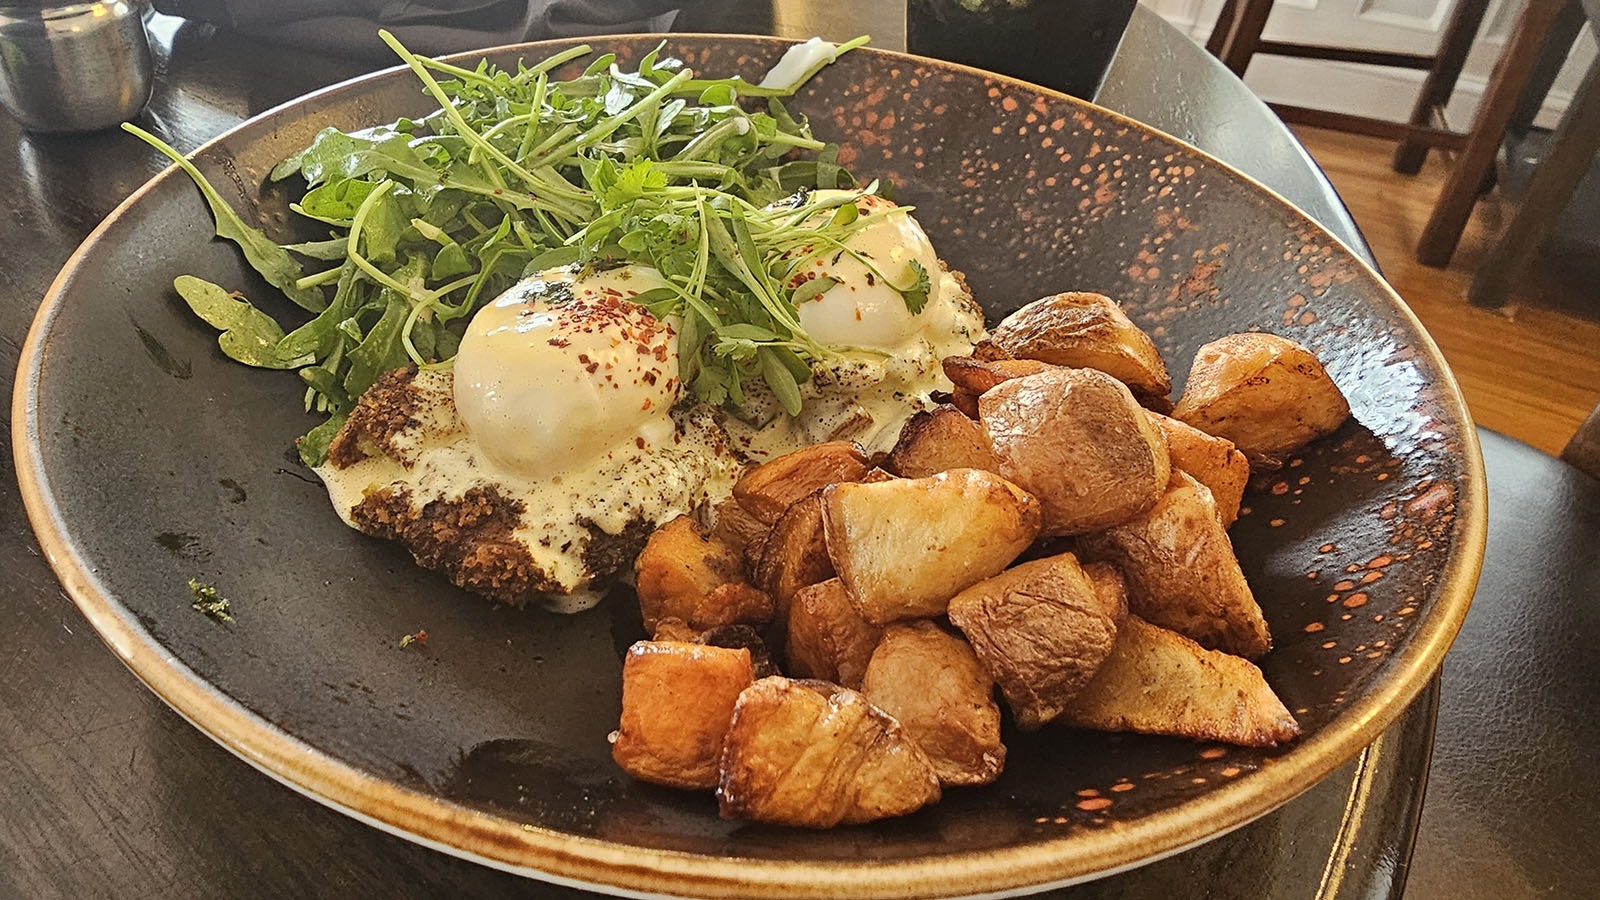 After enjoying the Frozen Dead Guy tour, the nearby Brunch and Co. offers a great breakfast. Here, the Grady Twins breakfast, which is two poached eggs on crab cakes, served with salad greens and potatoes.